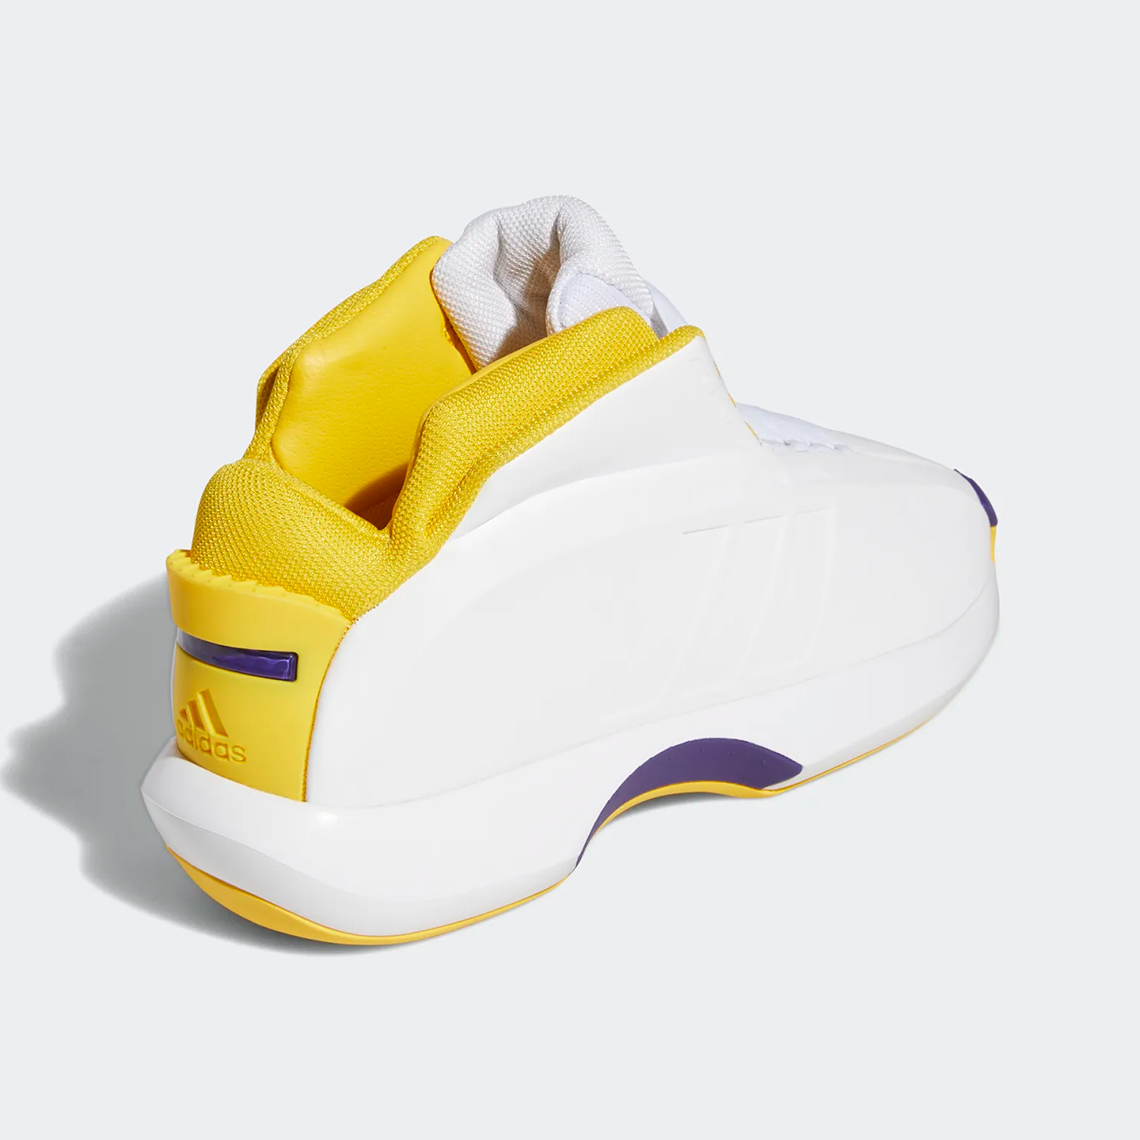 adidas crazy 1 lakers GY8947 8